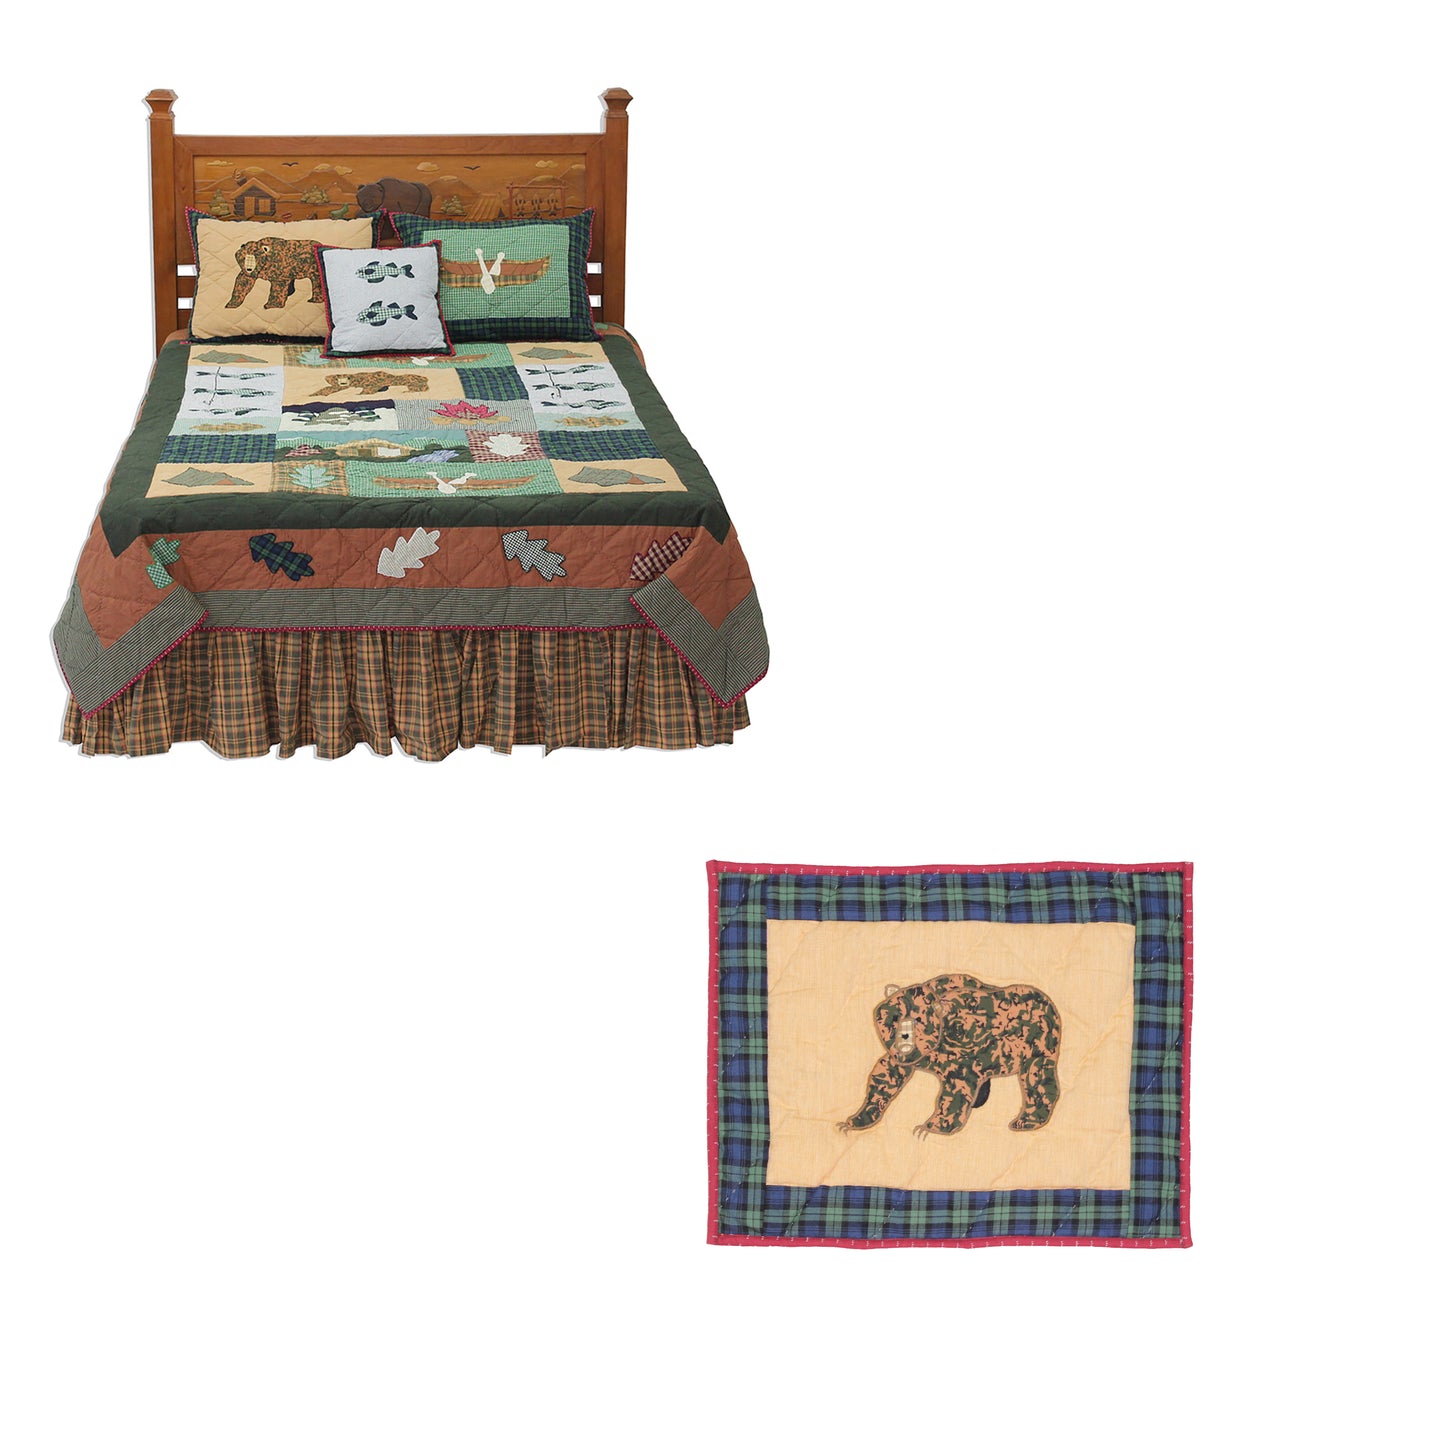 Quilted Cabin Bedding accessories and Ensemble sets.